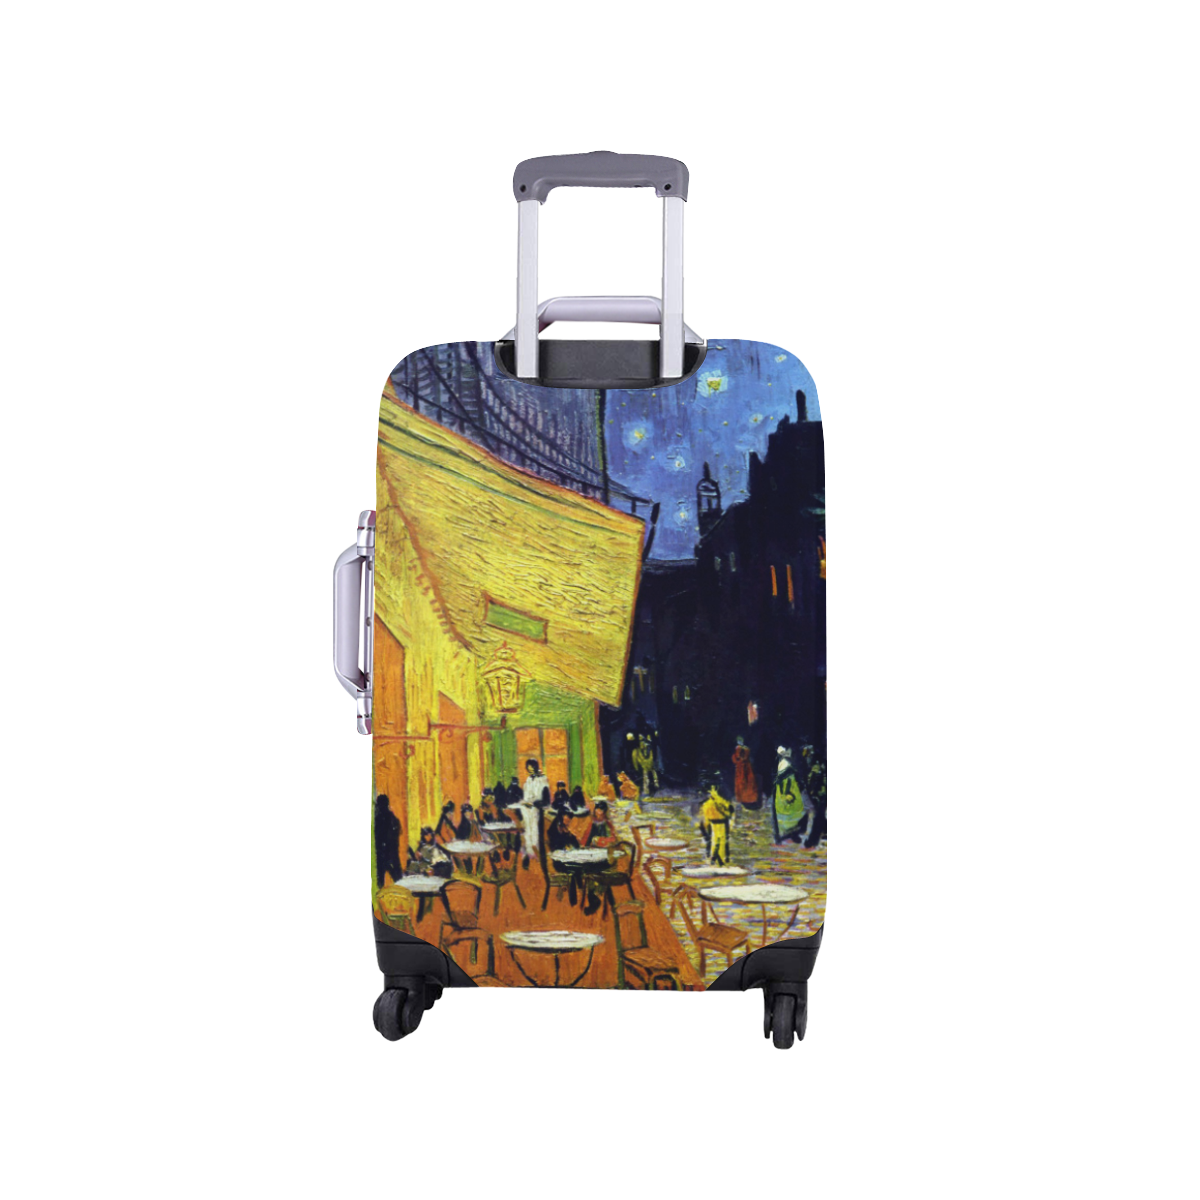 Vincent Willem van Gogh - Cafe Terrace at Night Luggage Cover/Small 18"-21"